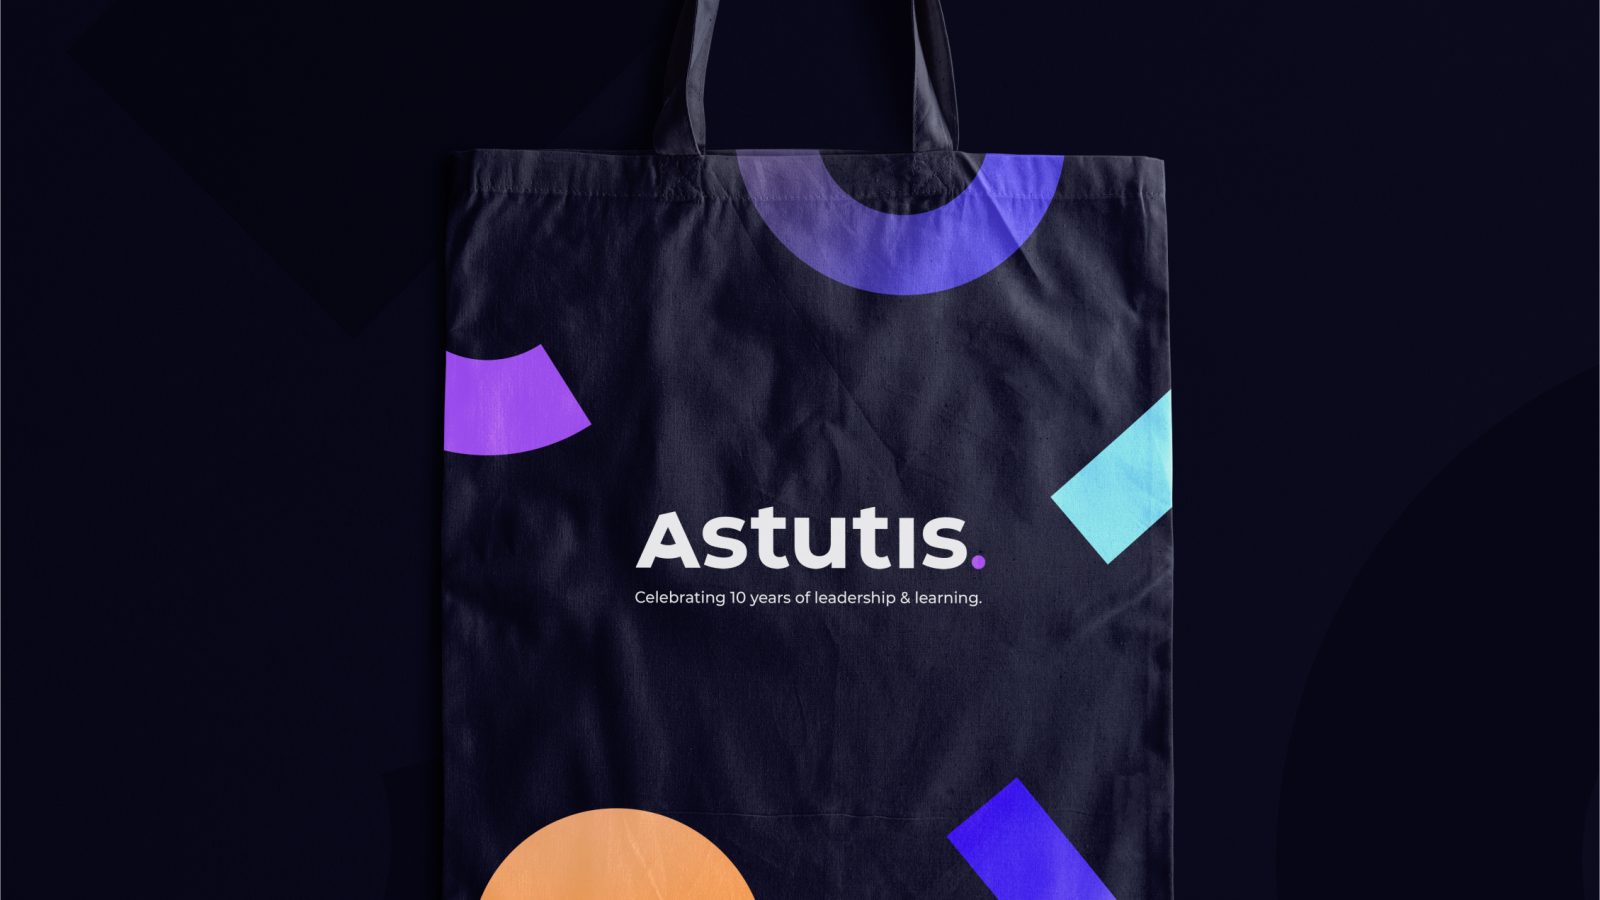 A promotional black tote bag with 